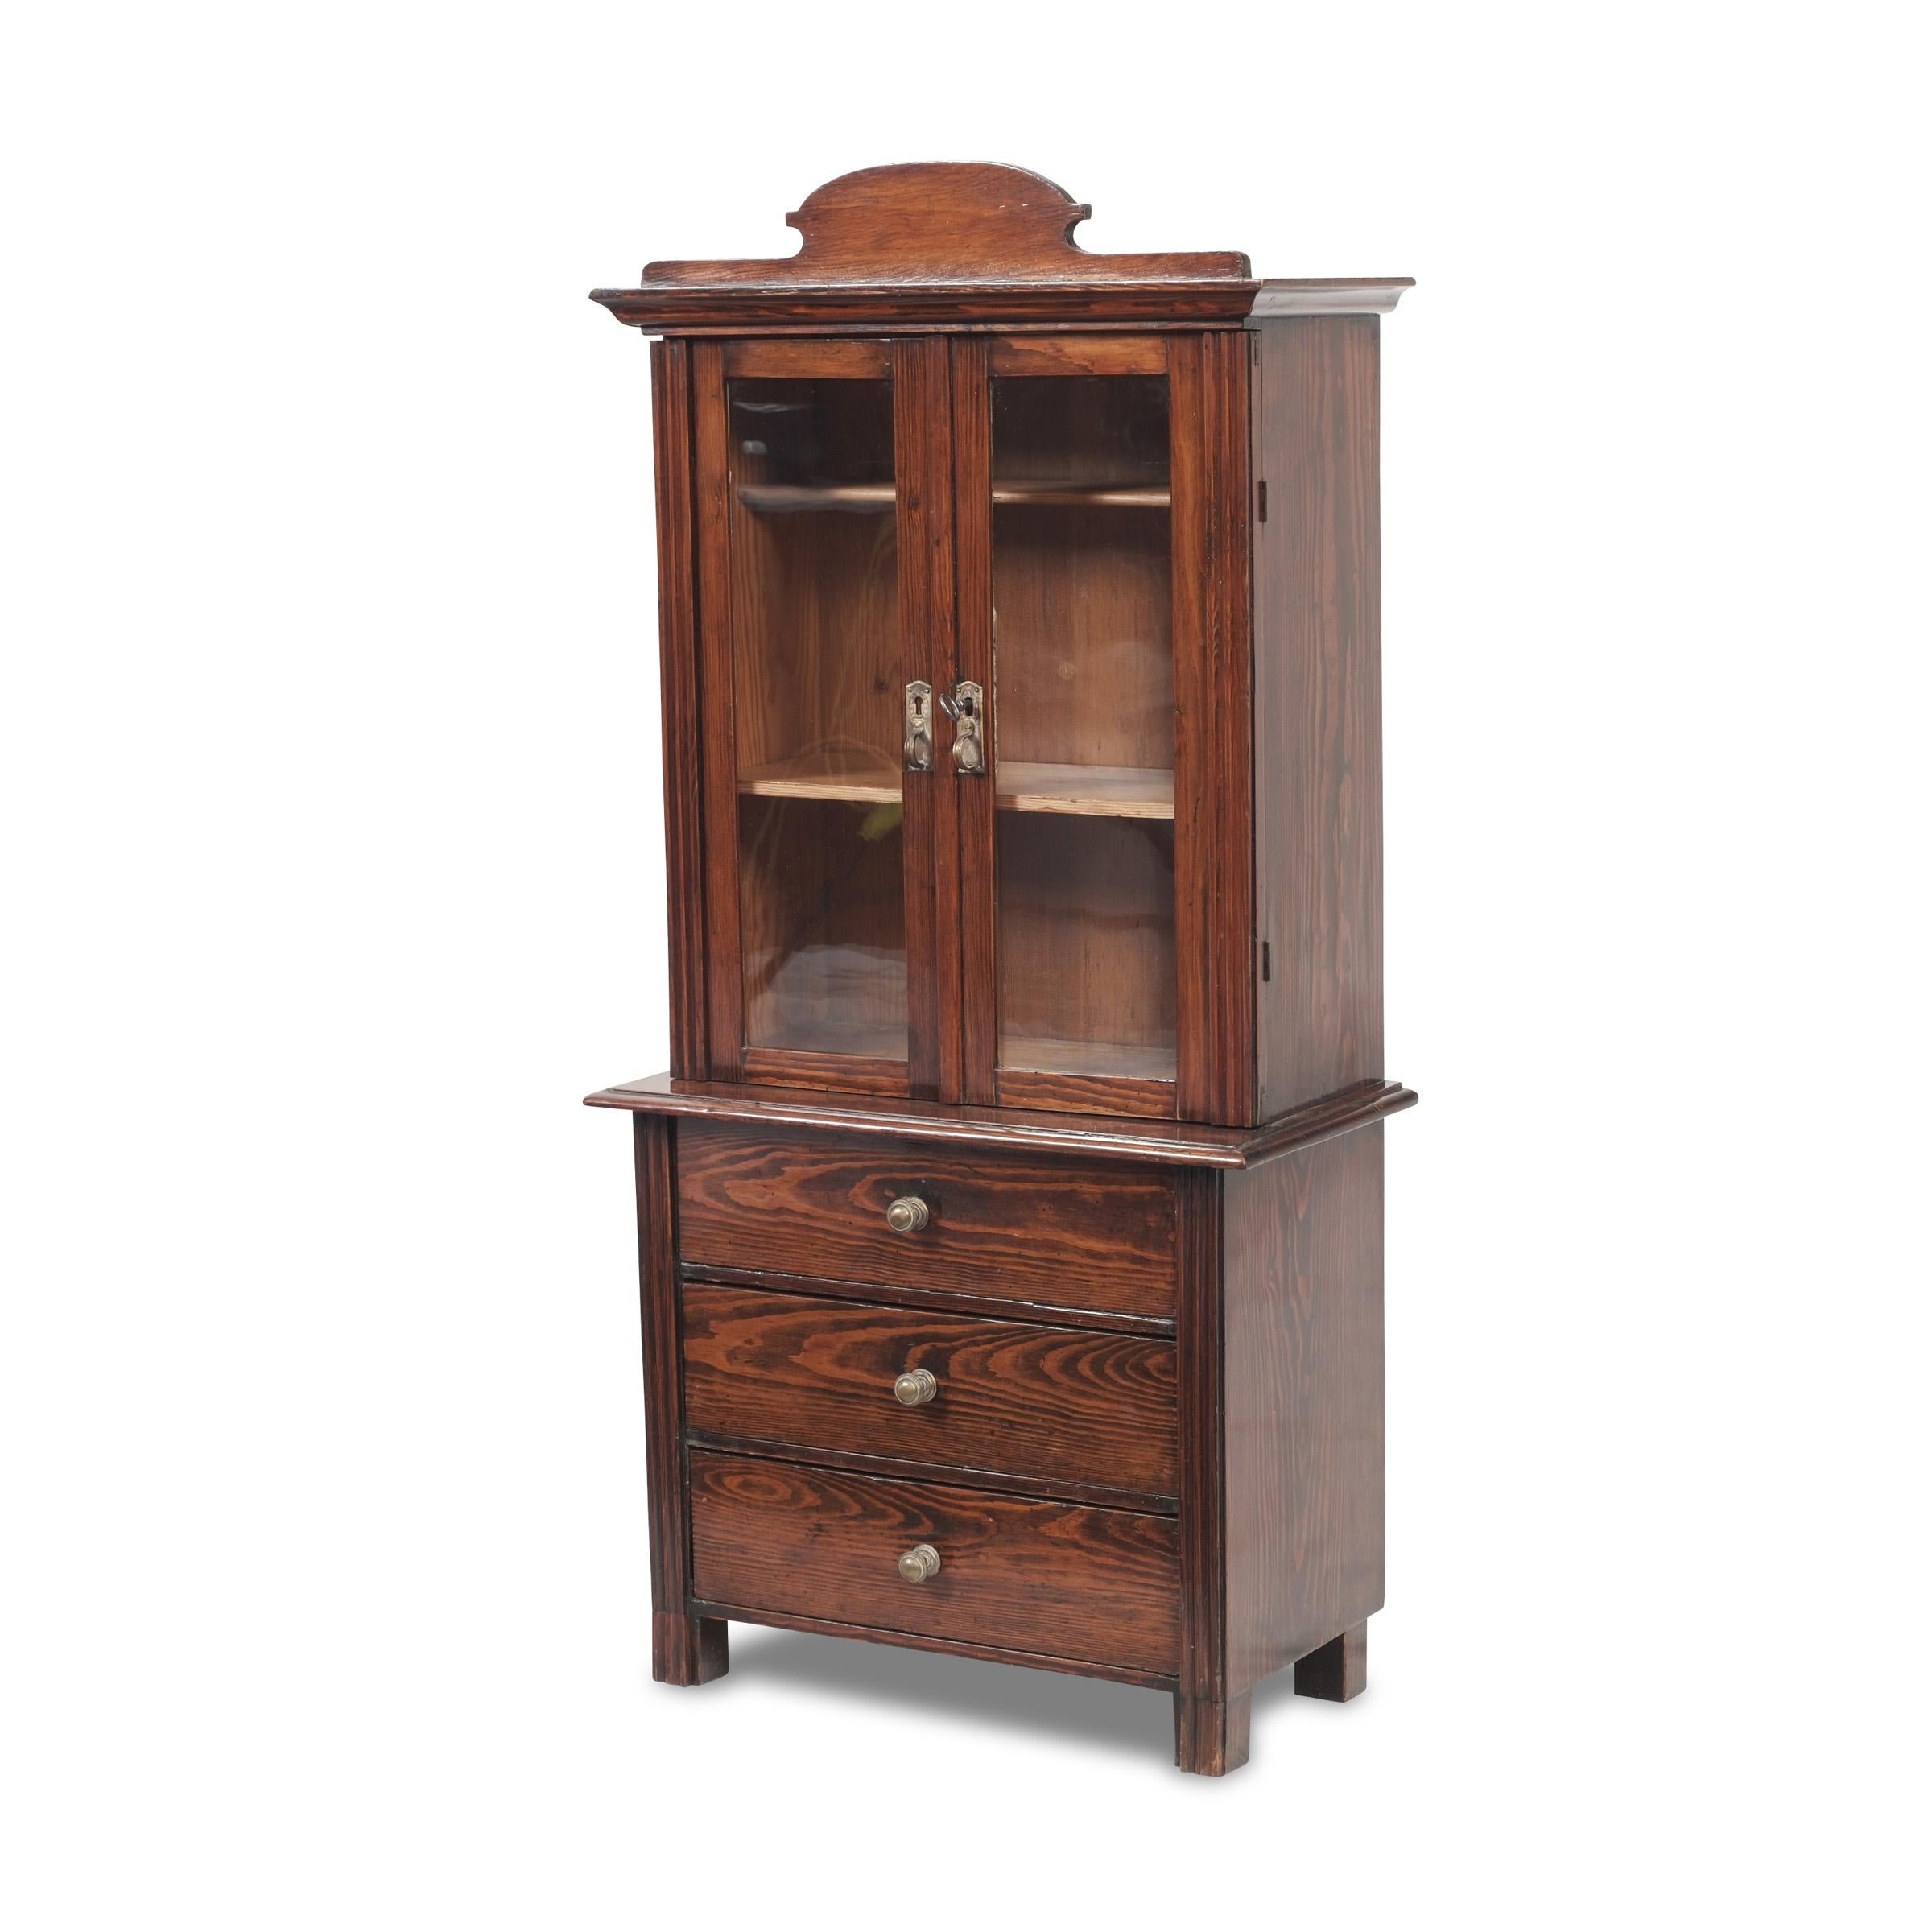 Miniature cabinet around 1870

ash, lower part with three drawers, showcase top with small pediment, original glass and fittings

 

Dimensions: height 104 cm - width 50.5 cm - depth 26 cm